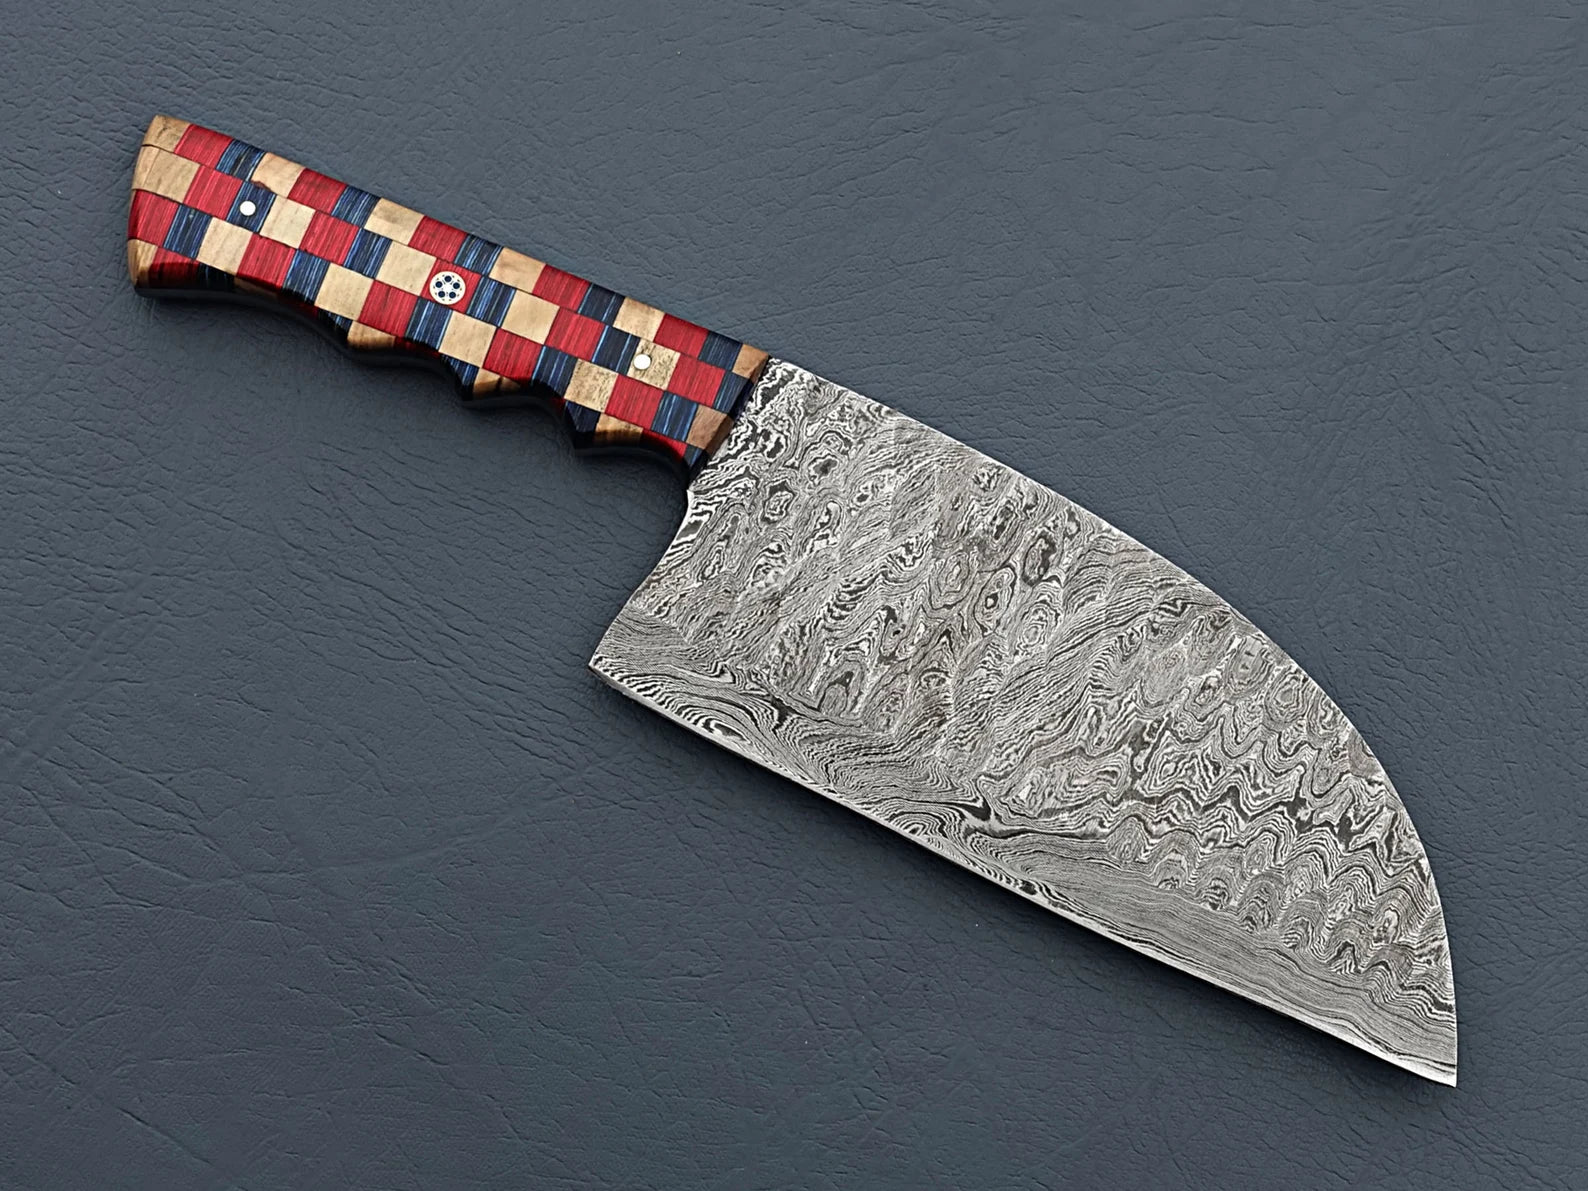 Damascus Steel Serbian Chef Knife – Multi-Colored Handle